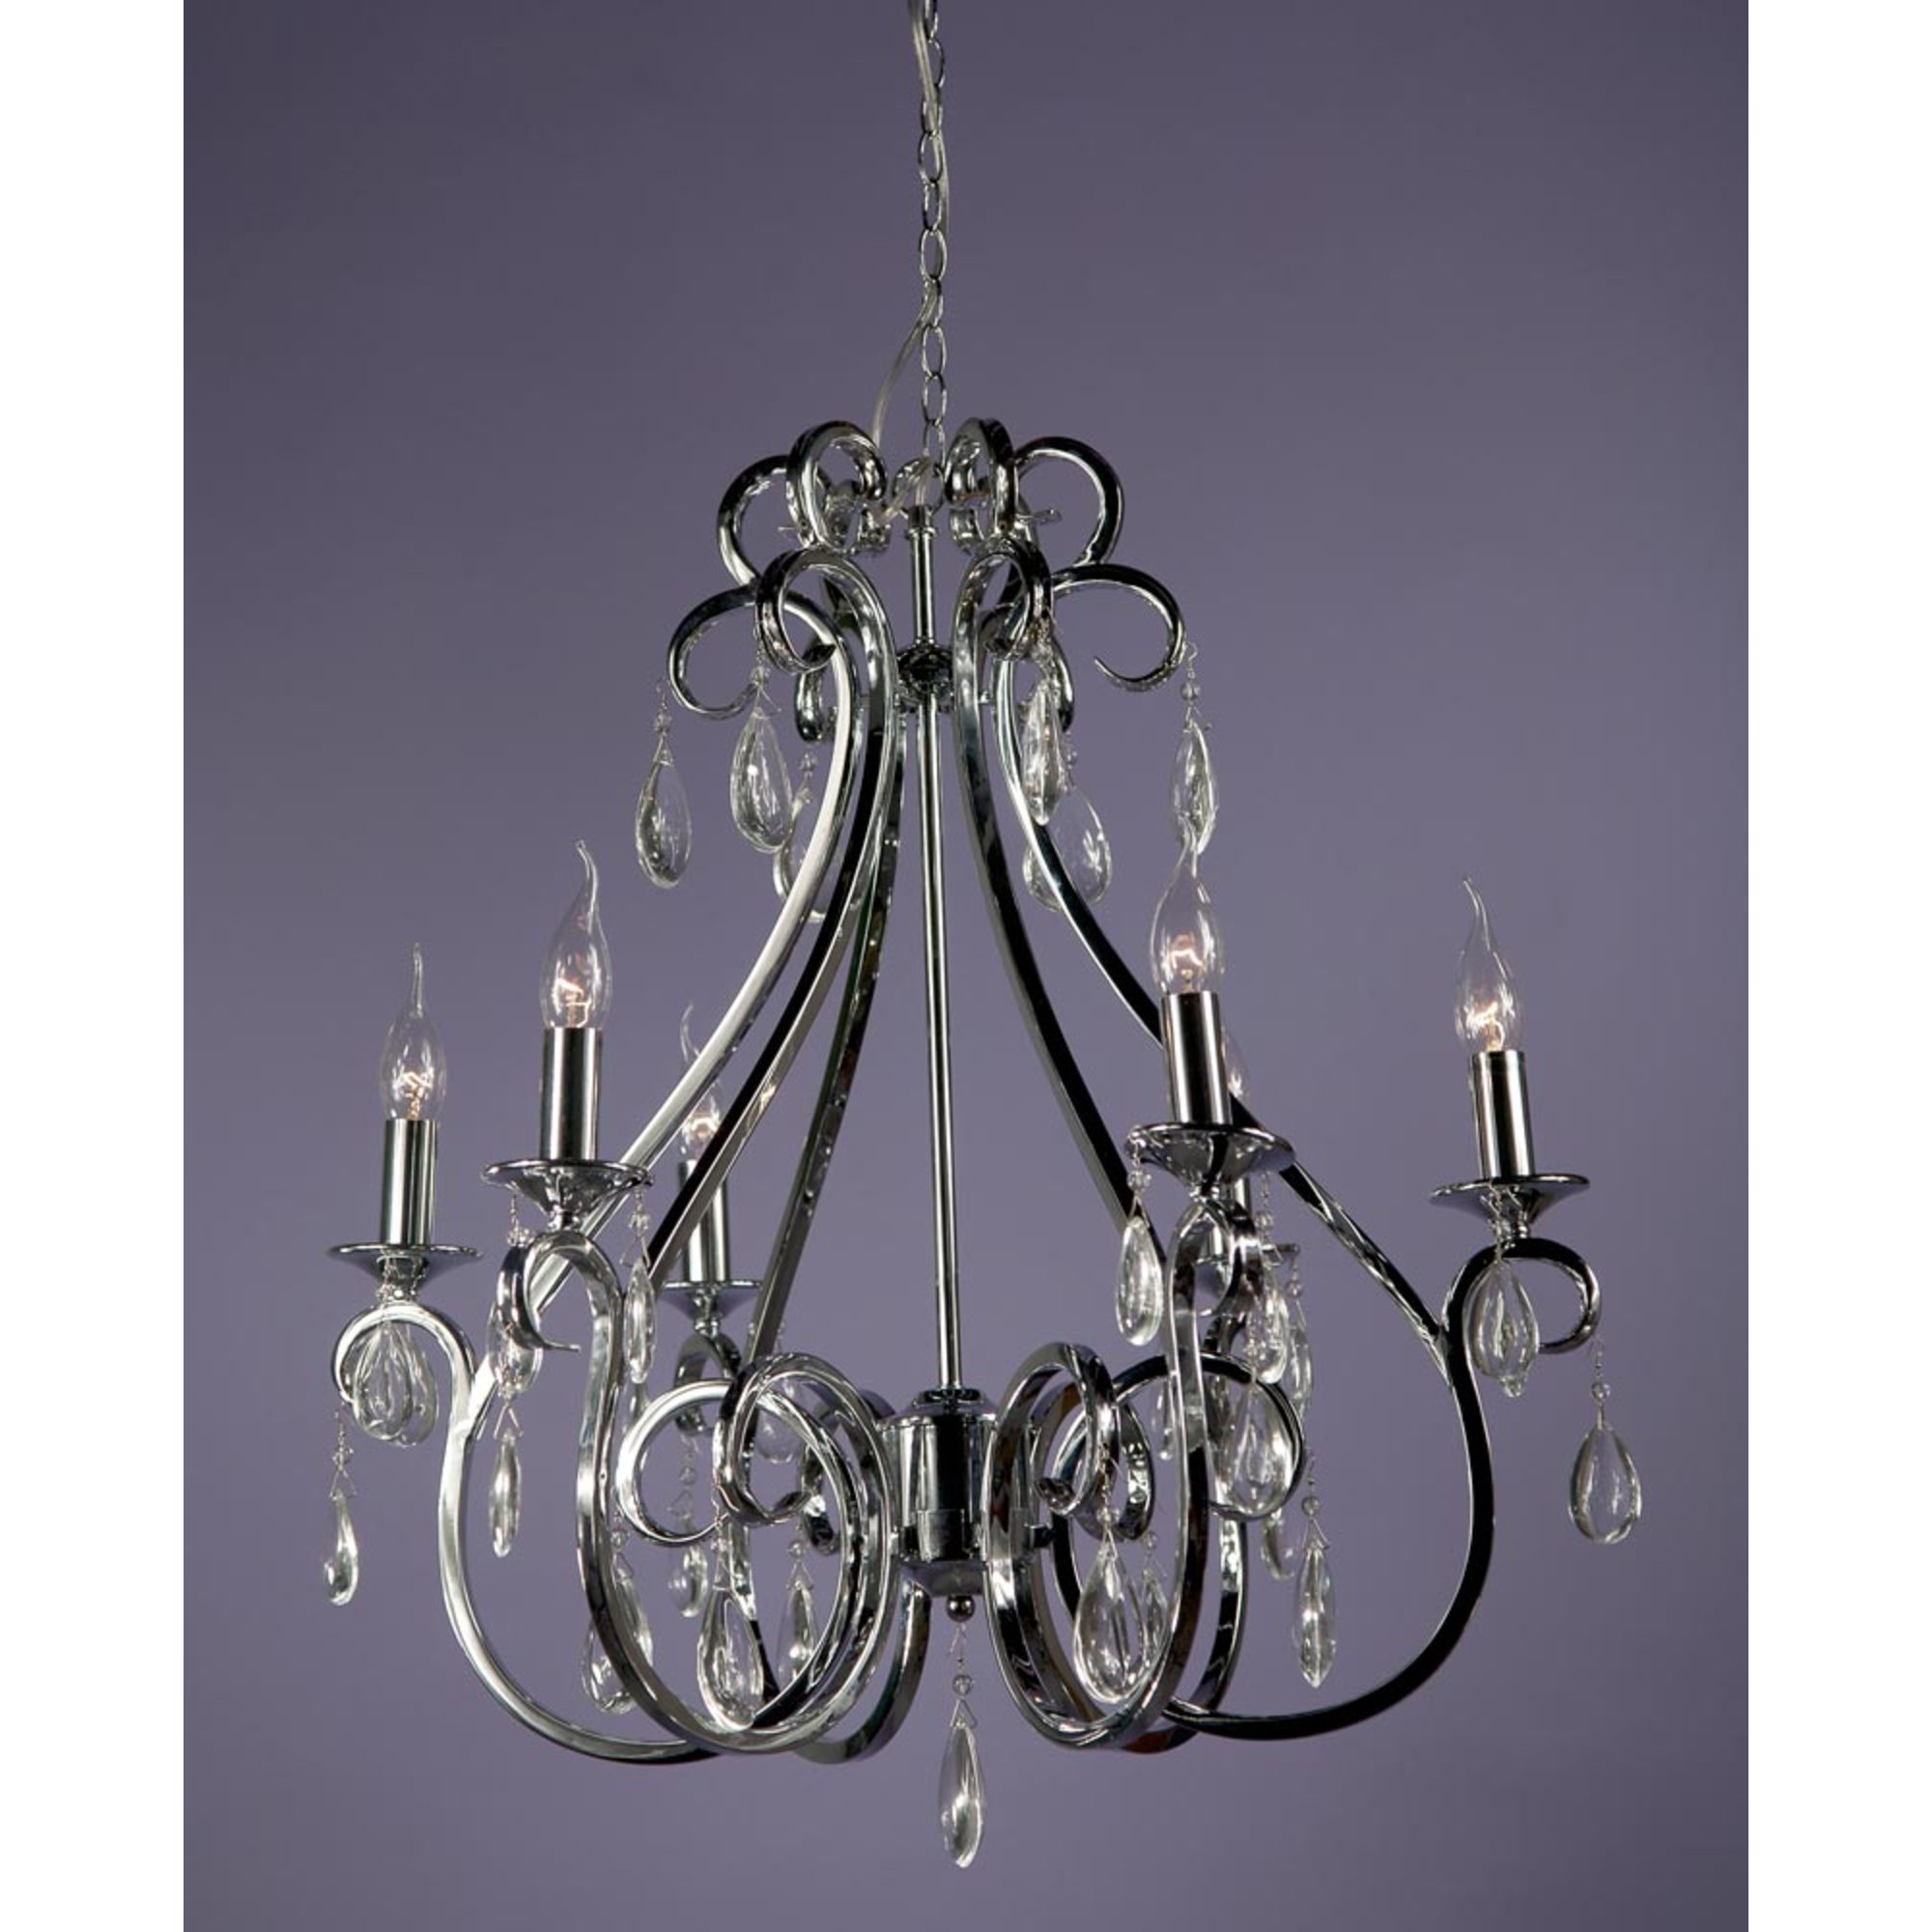 Swirl 6 Light Chandelier - Chrome and Clear